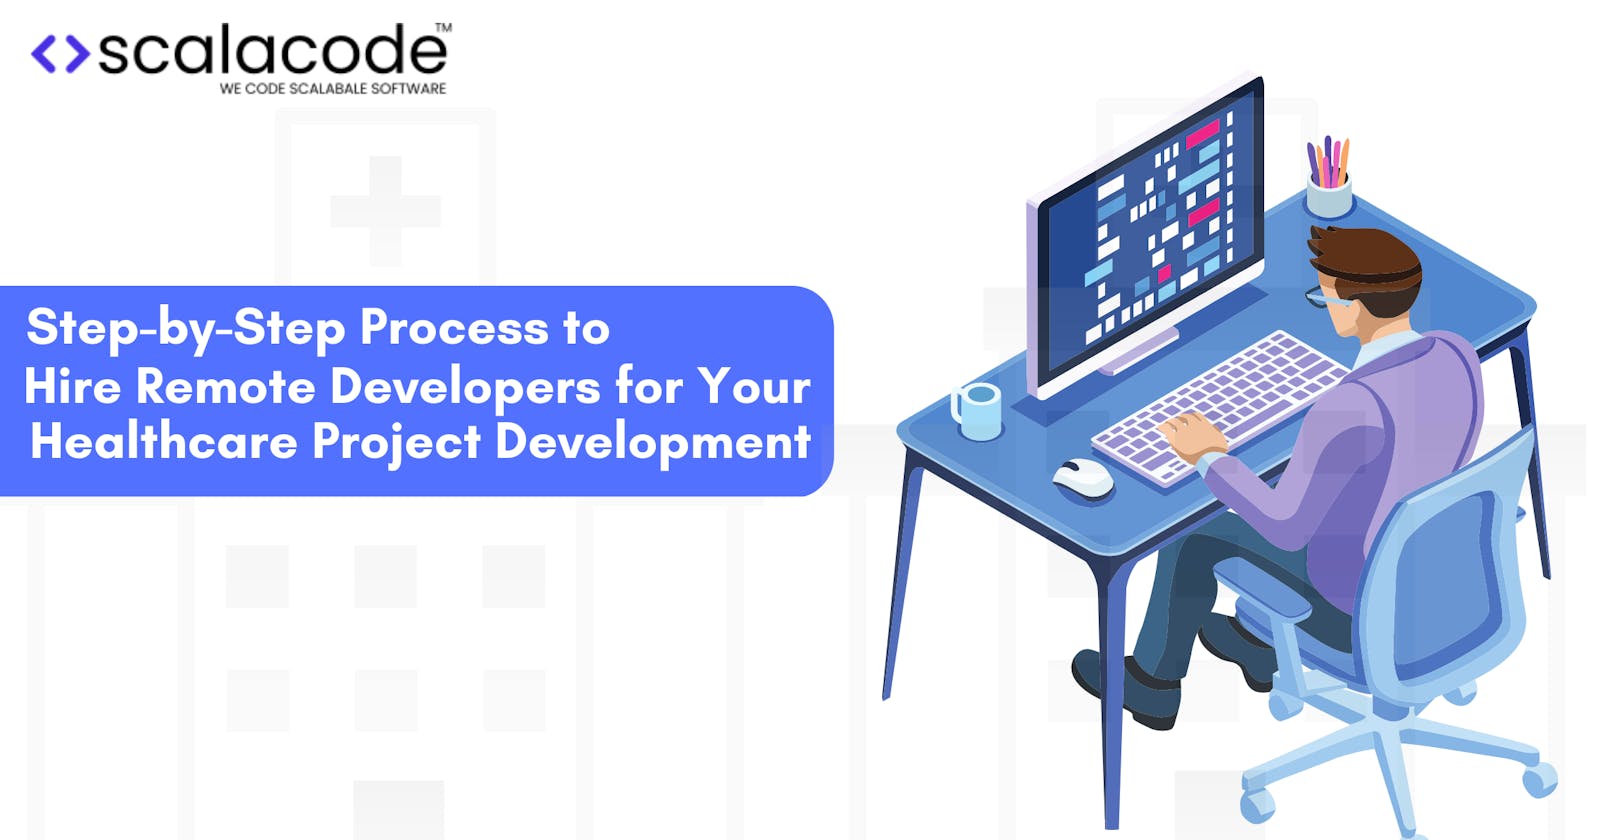 Step-by-step Process to Hire Remote Developers for Your Healthcare Project Development